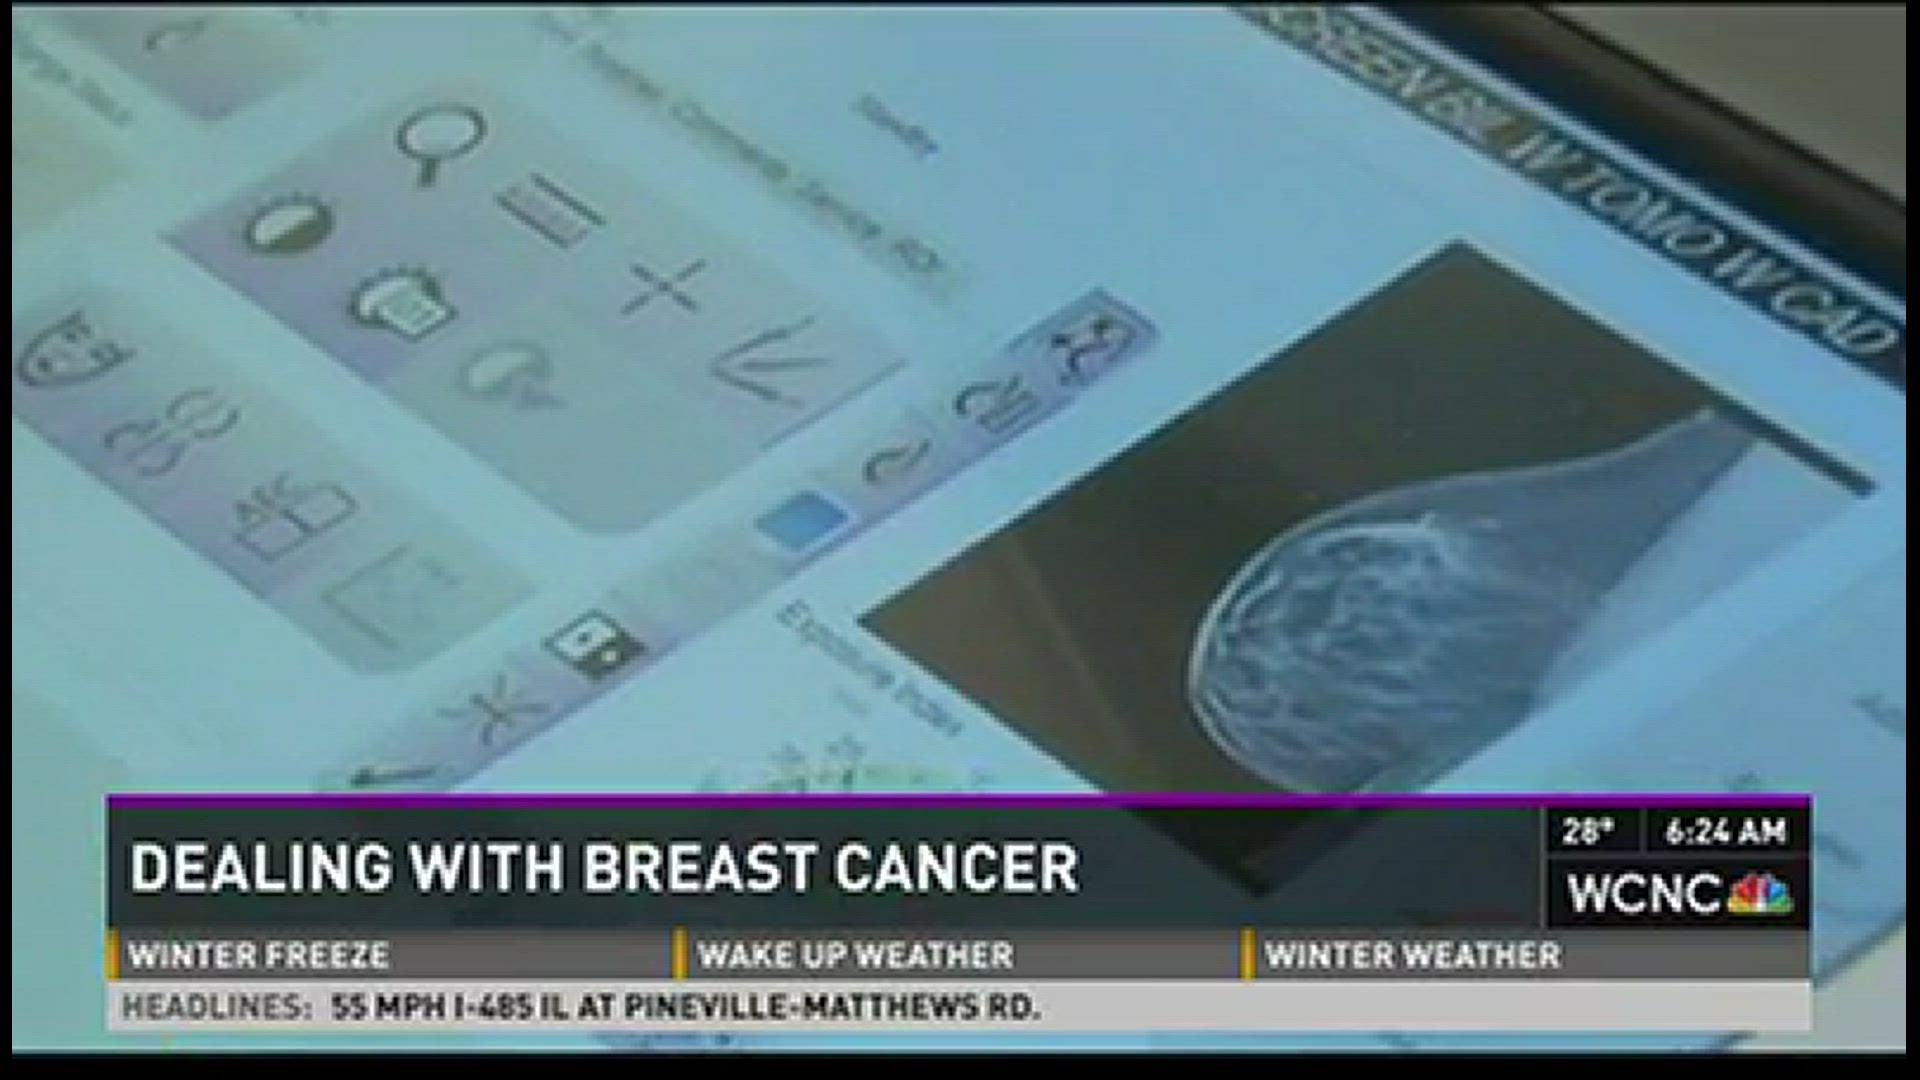 What happens when you find out you have breast cancer?